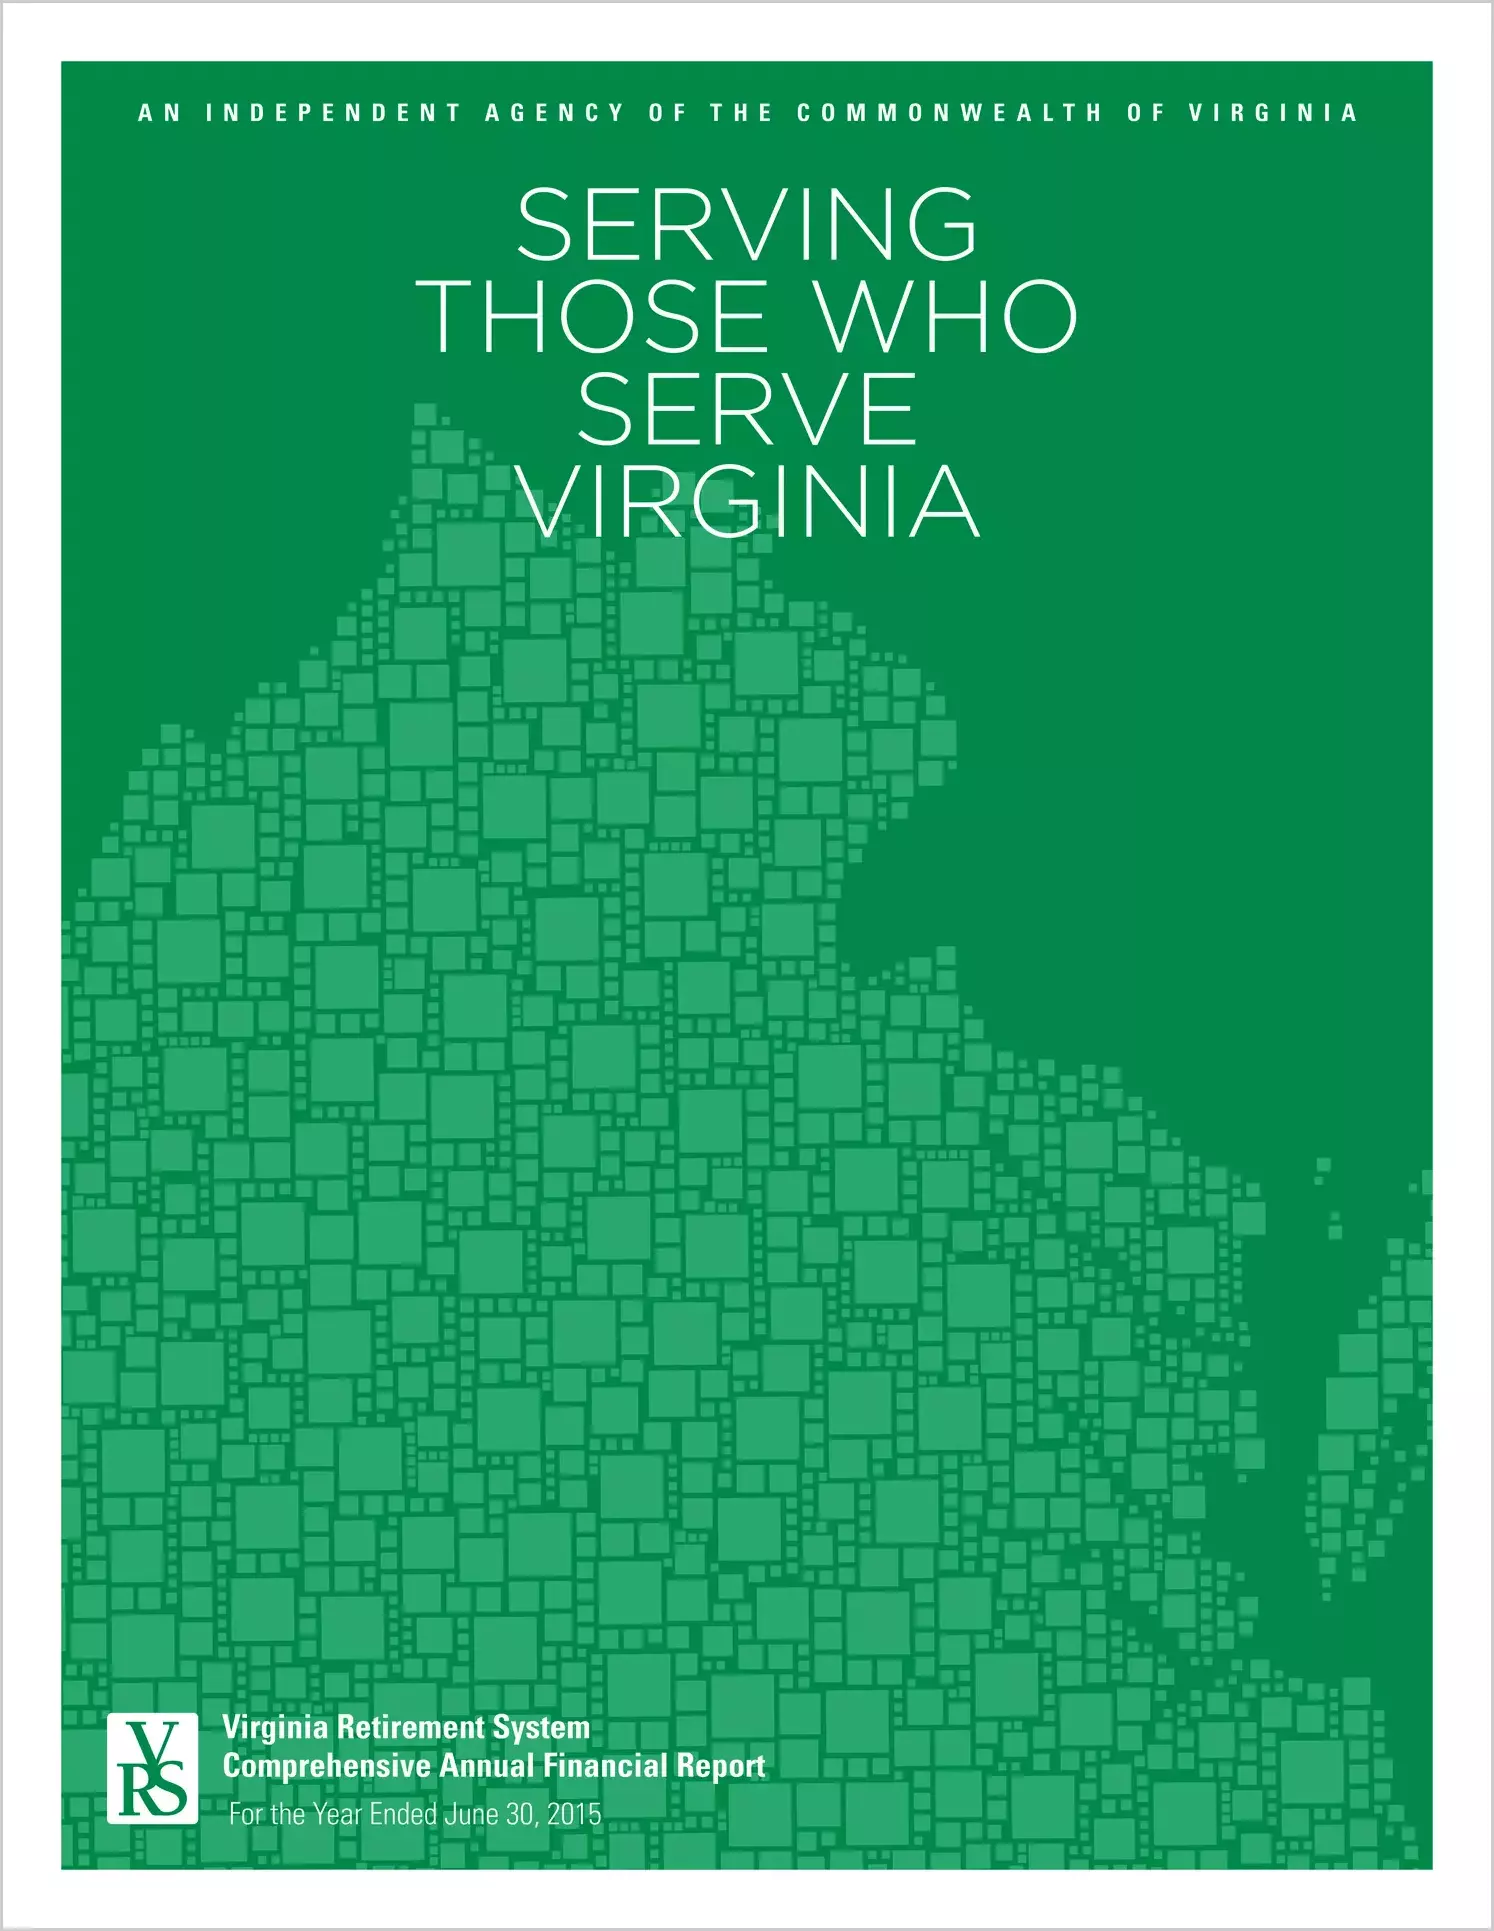 Virginia Retirement System Financial Statements for the year ended June 30, 2015